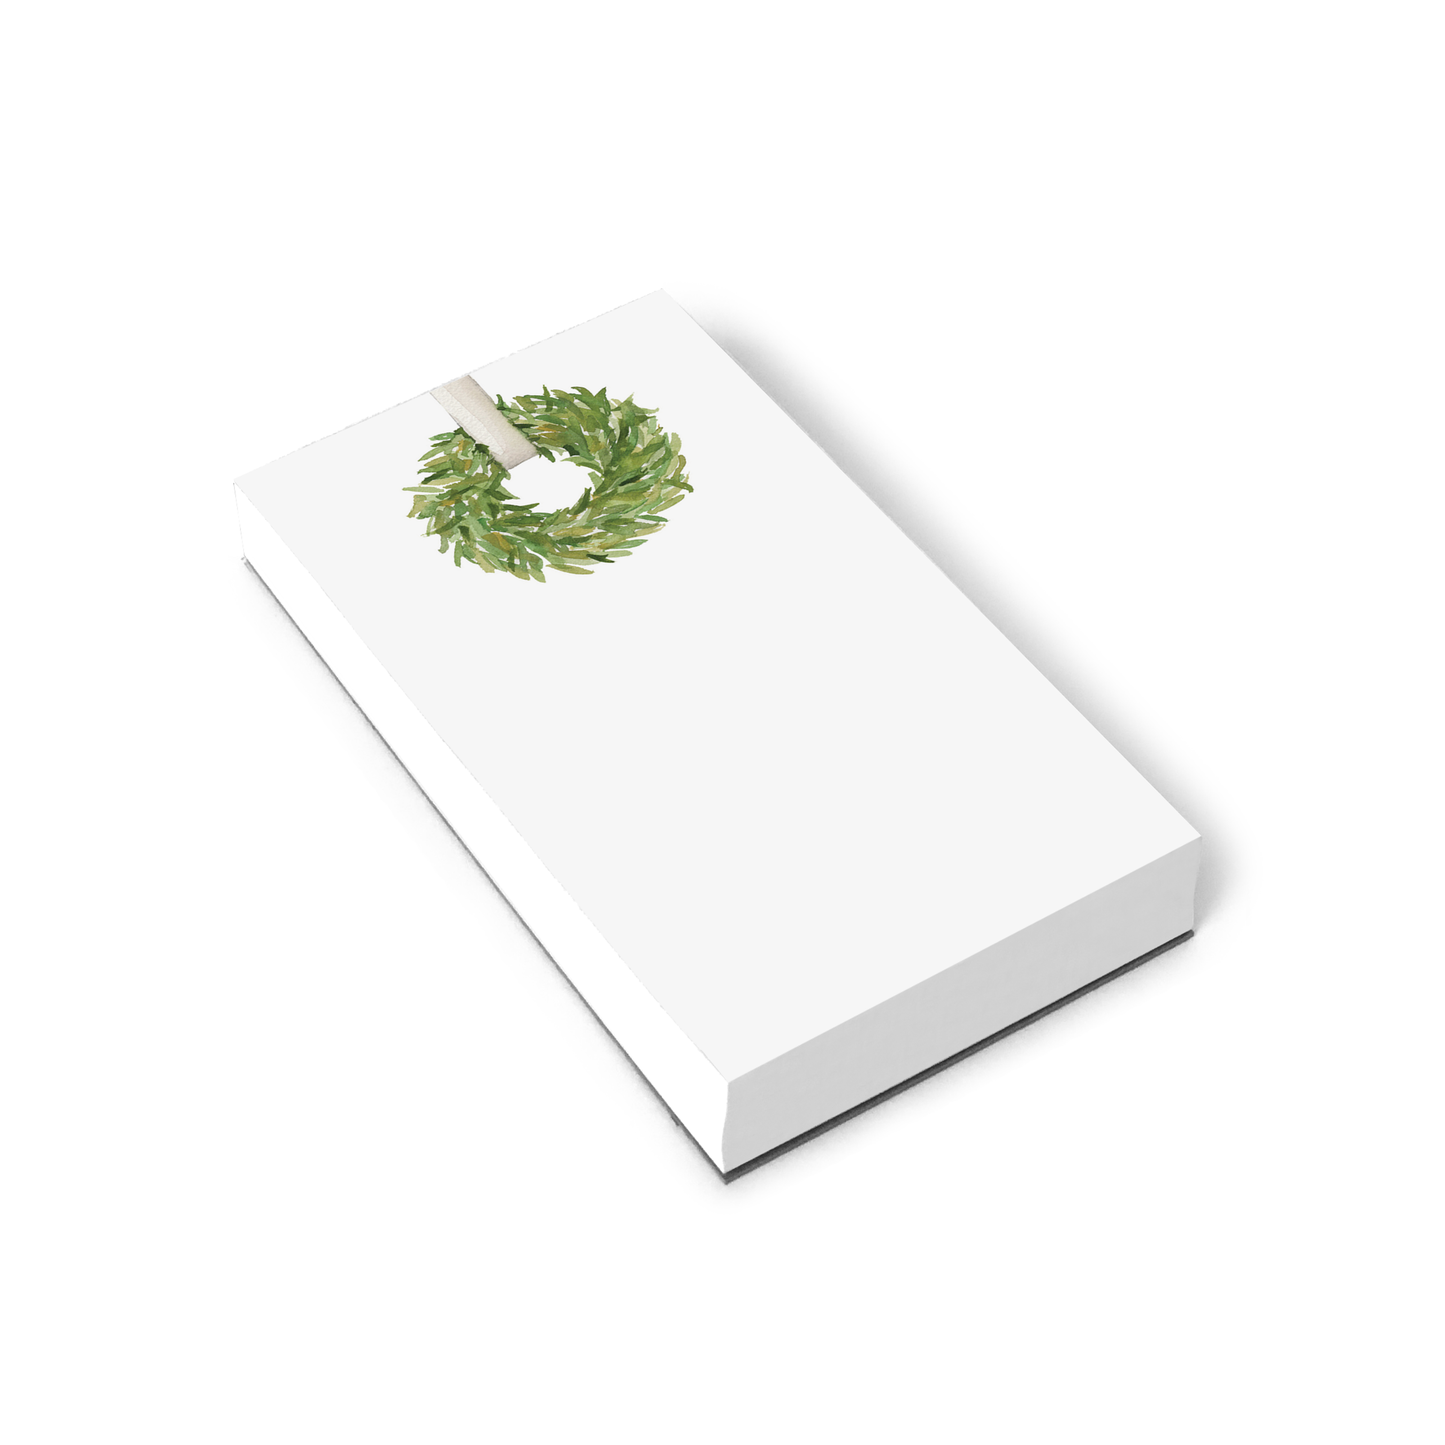 NP721 wreath notepad classic wreath note pad desk pad holiday christmas 